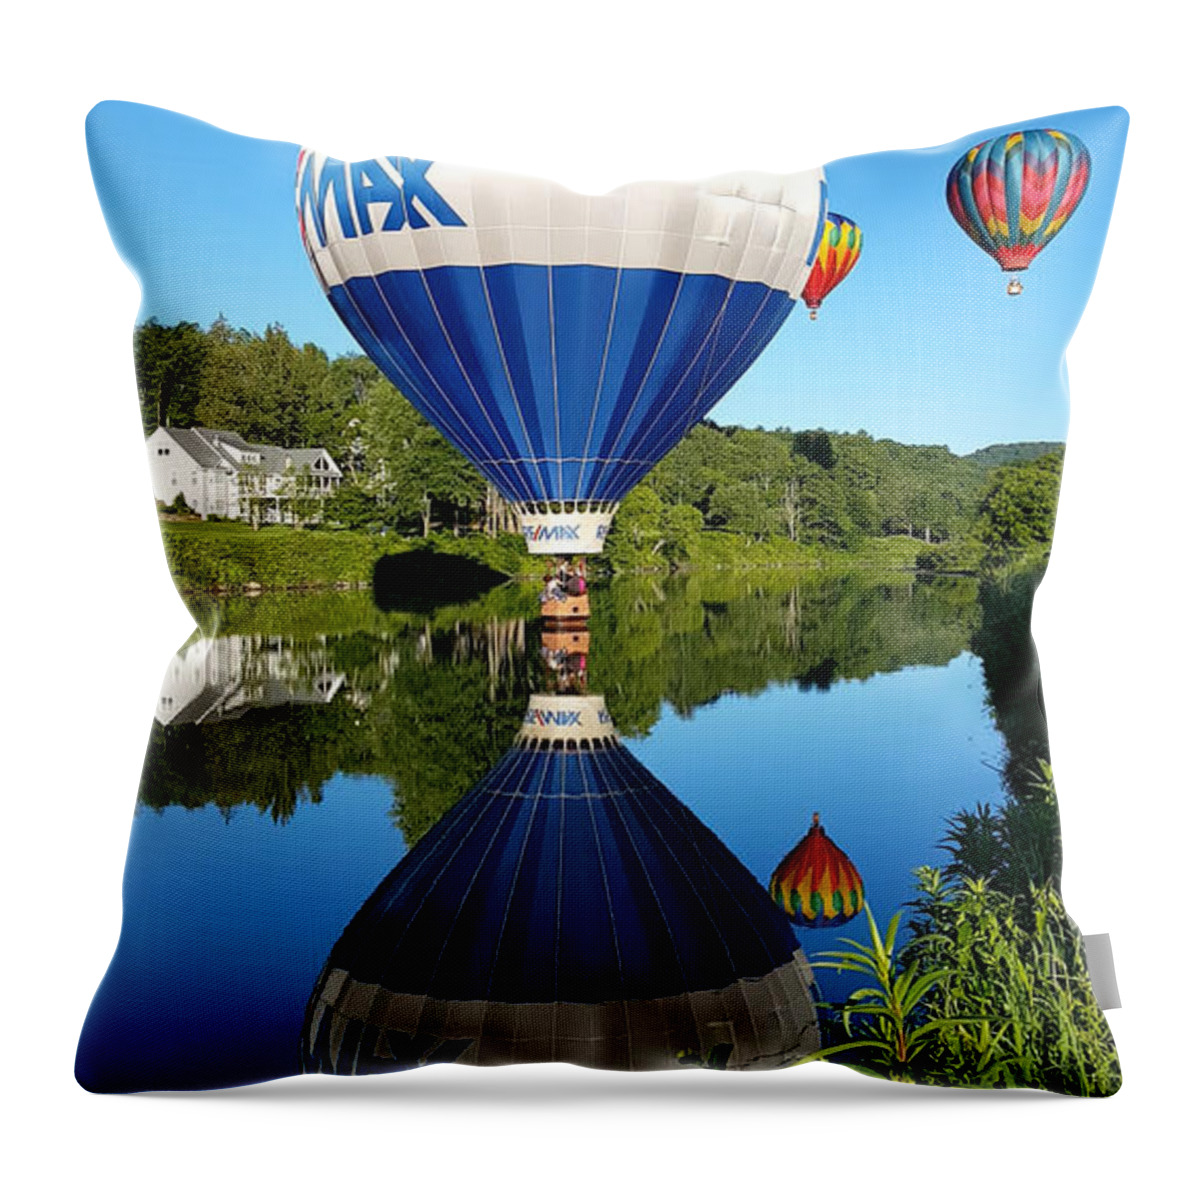 New England Throw Pillow featuring the photograph Big max balloon on the surface by Jeff Folger